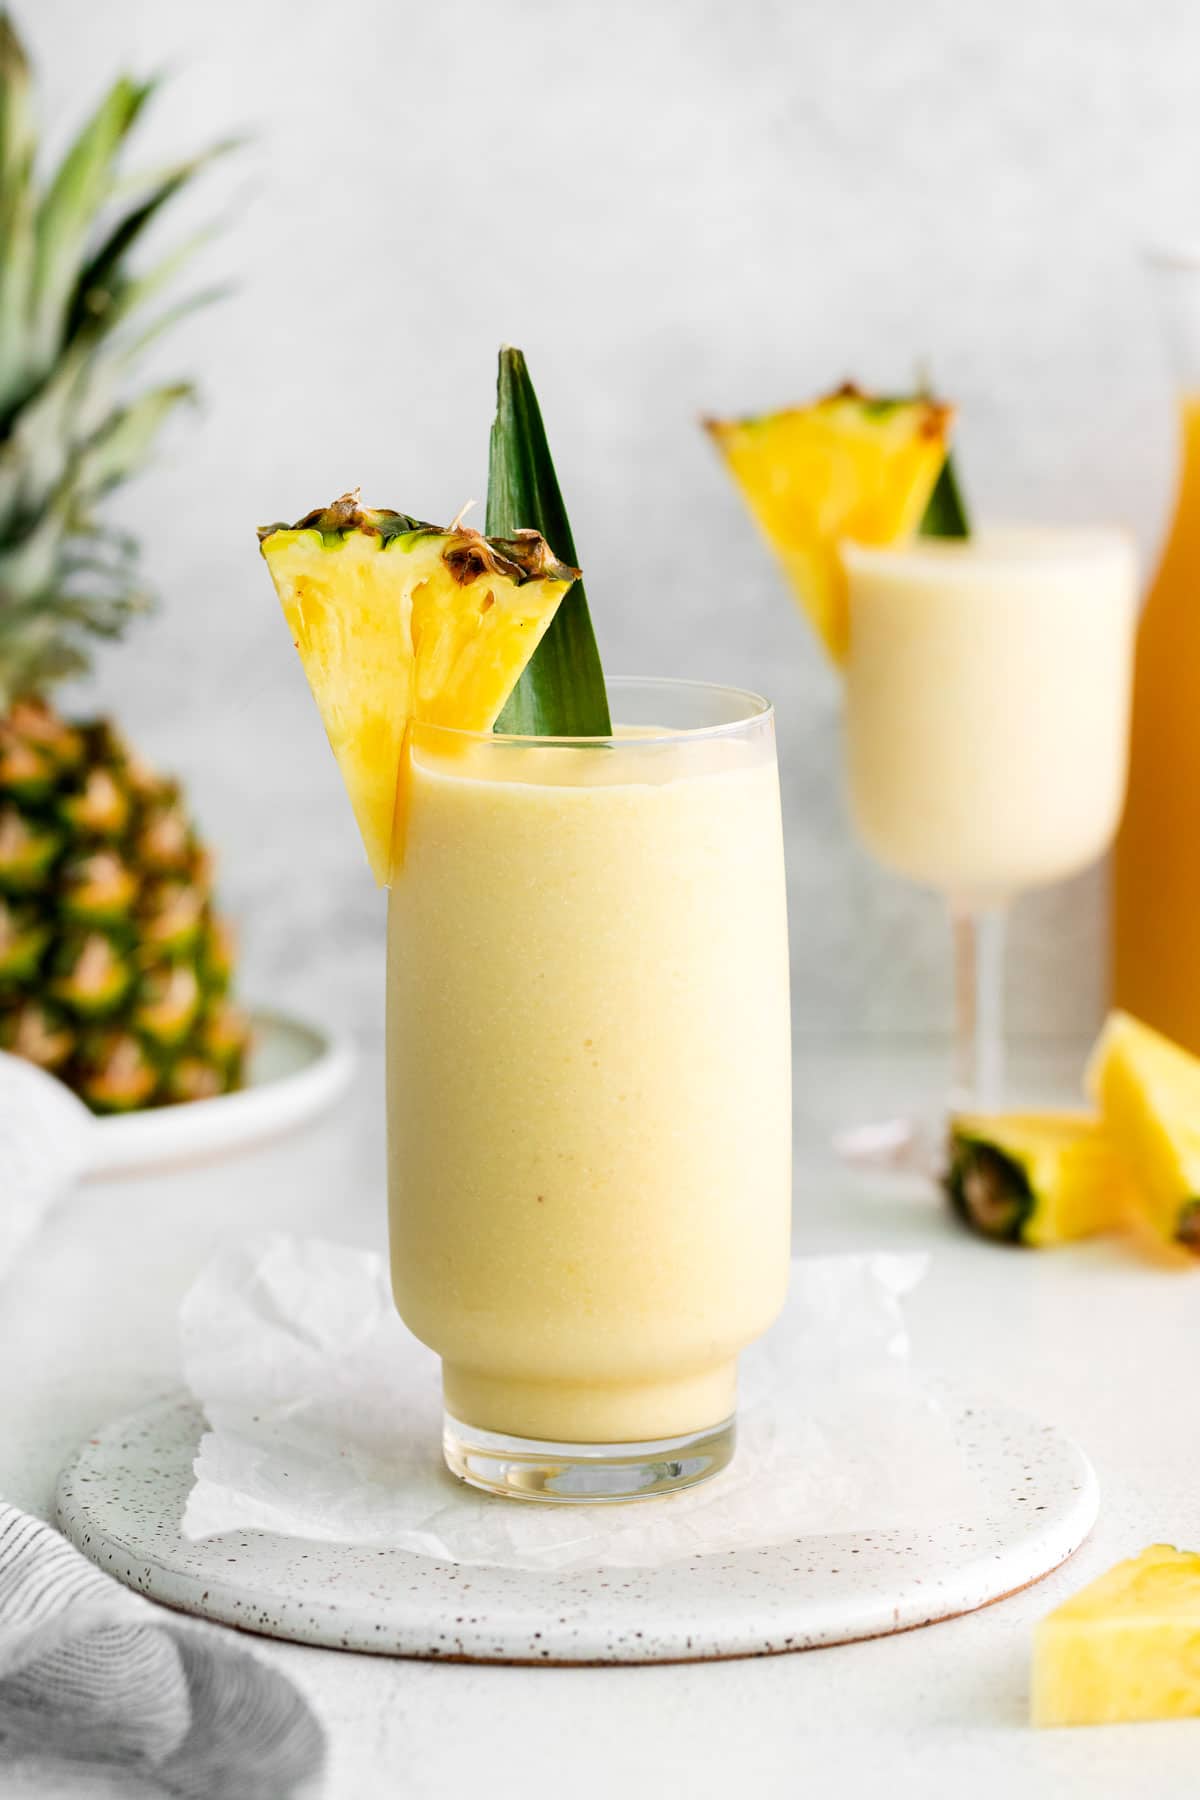 A tall glass filled with virgin pina colada and garnished with a pineapple wedge and leaf.